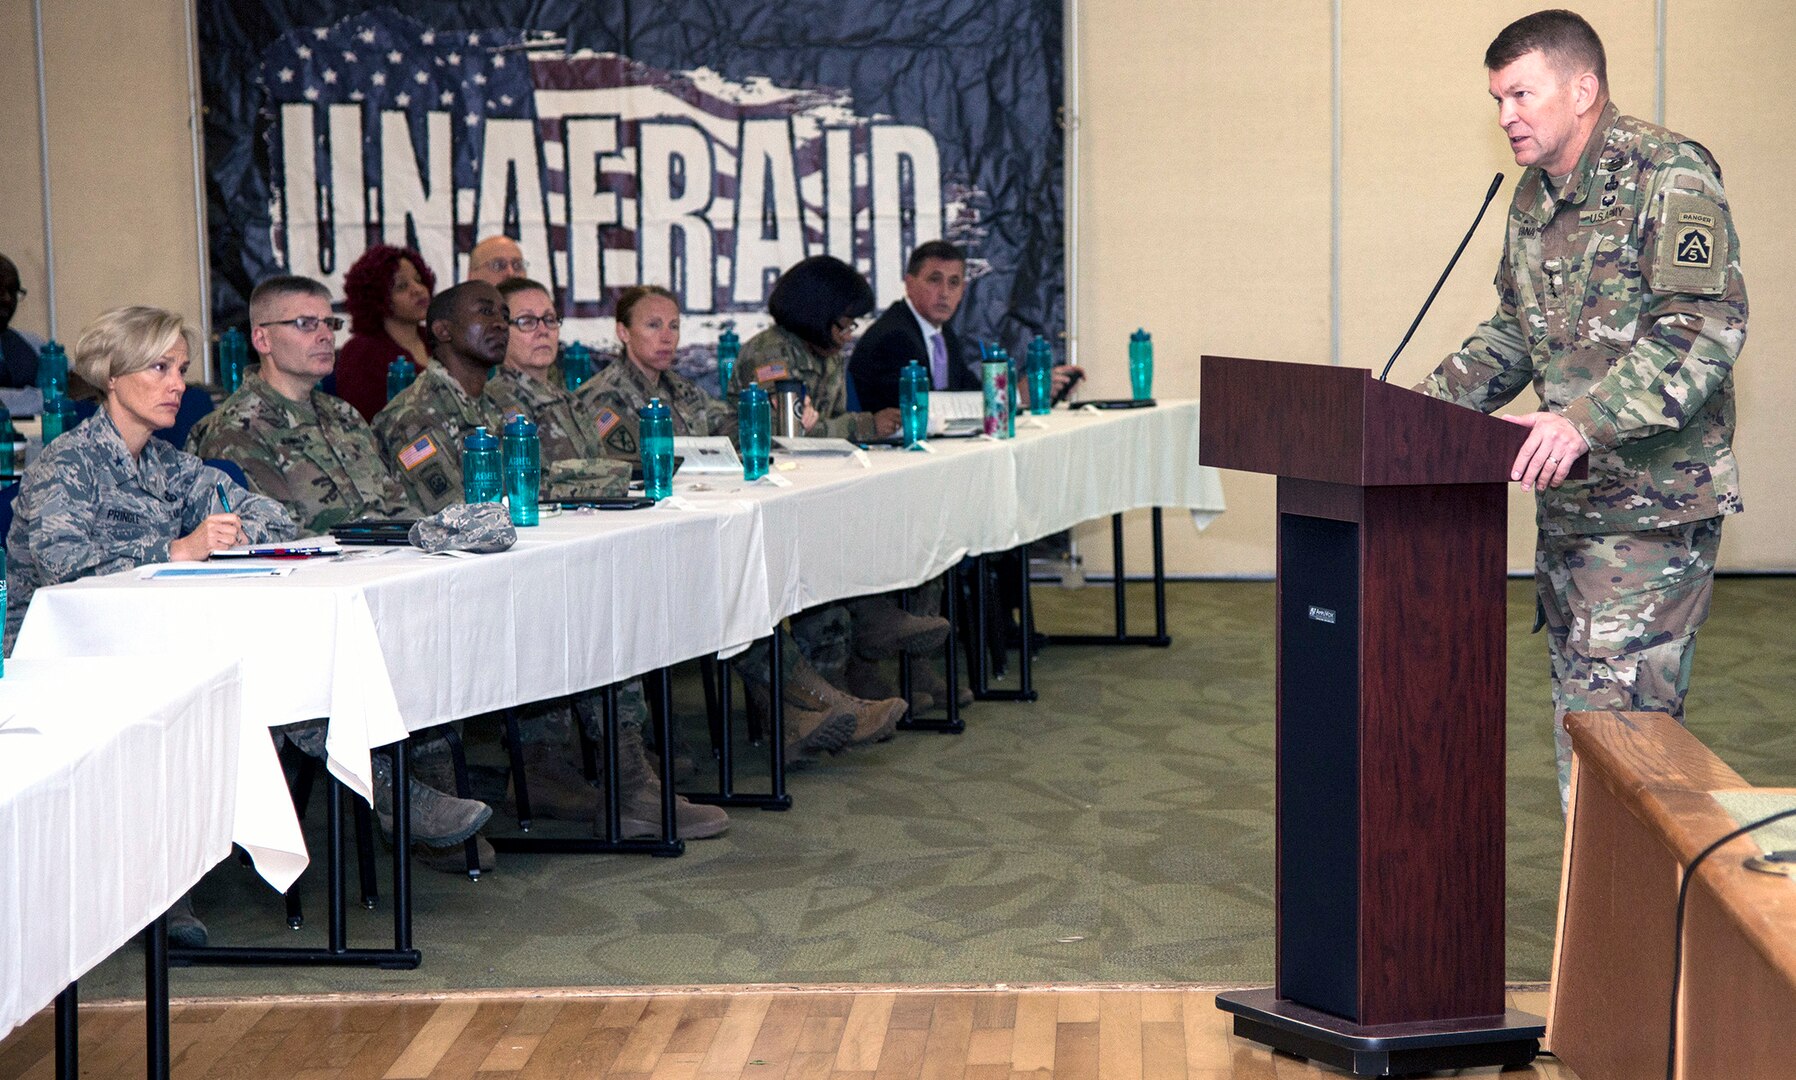 In his opening remarks at the Joint Base San Antonio Sexual Assault Awareness and Prevention Summit at the Sam Houston Community Center at JBSA-Fort Sam Houston April 19, Lt. Gen. Jeffrey Buchanan, U.S. Army North (Fifth Army) commanding general, said service members need to build a culture of trust in preventing and stopping sexual assault in the military.